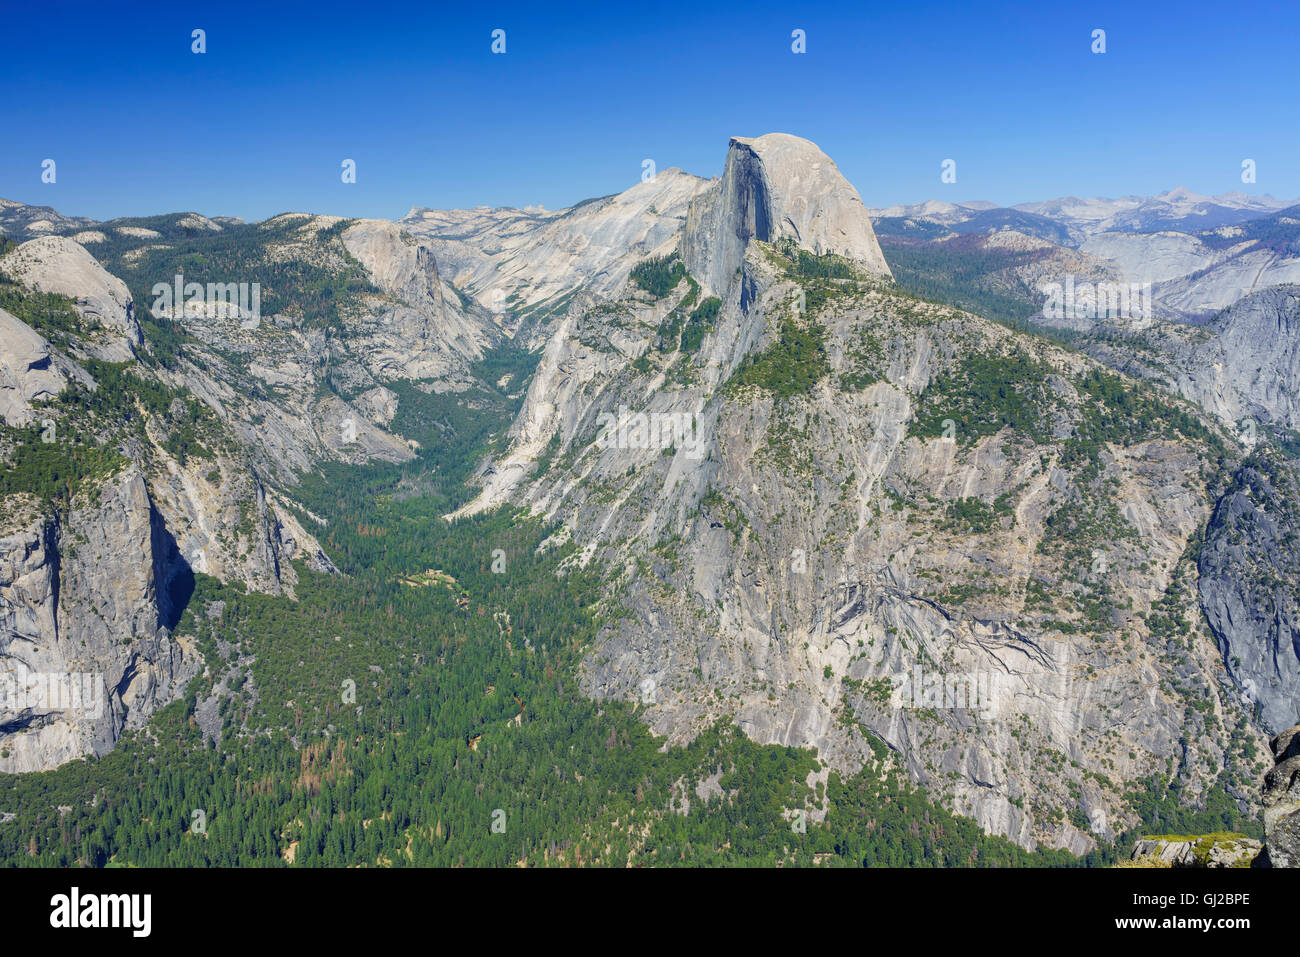 The beautiful landscape of Glacier Point in Yosemite National Park Stock Photo